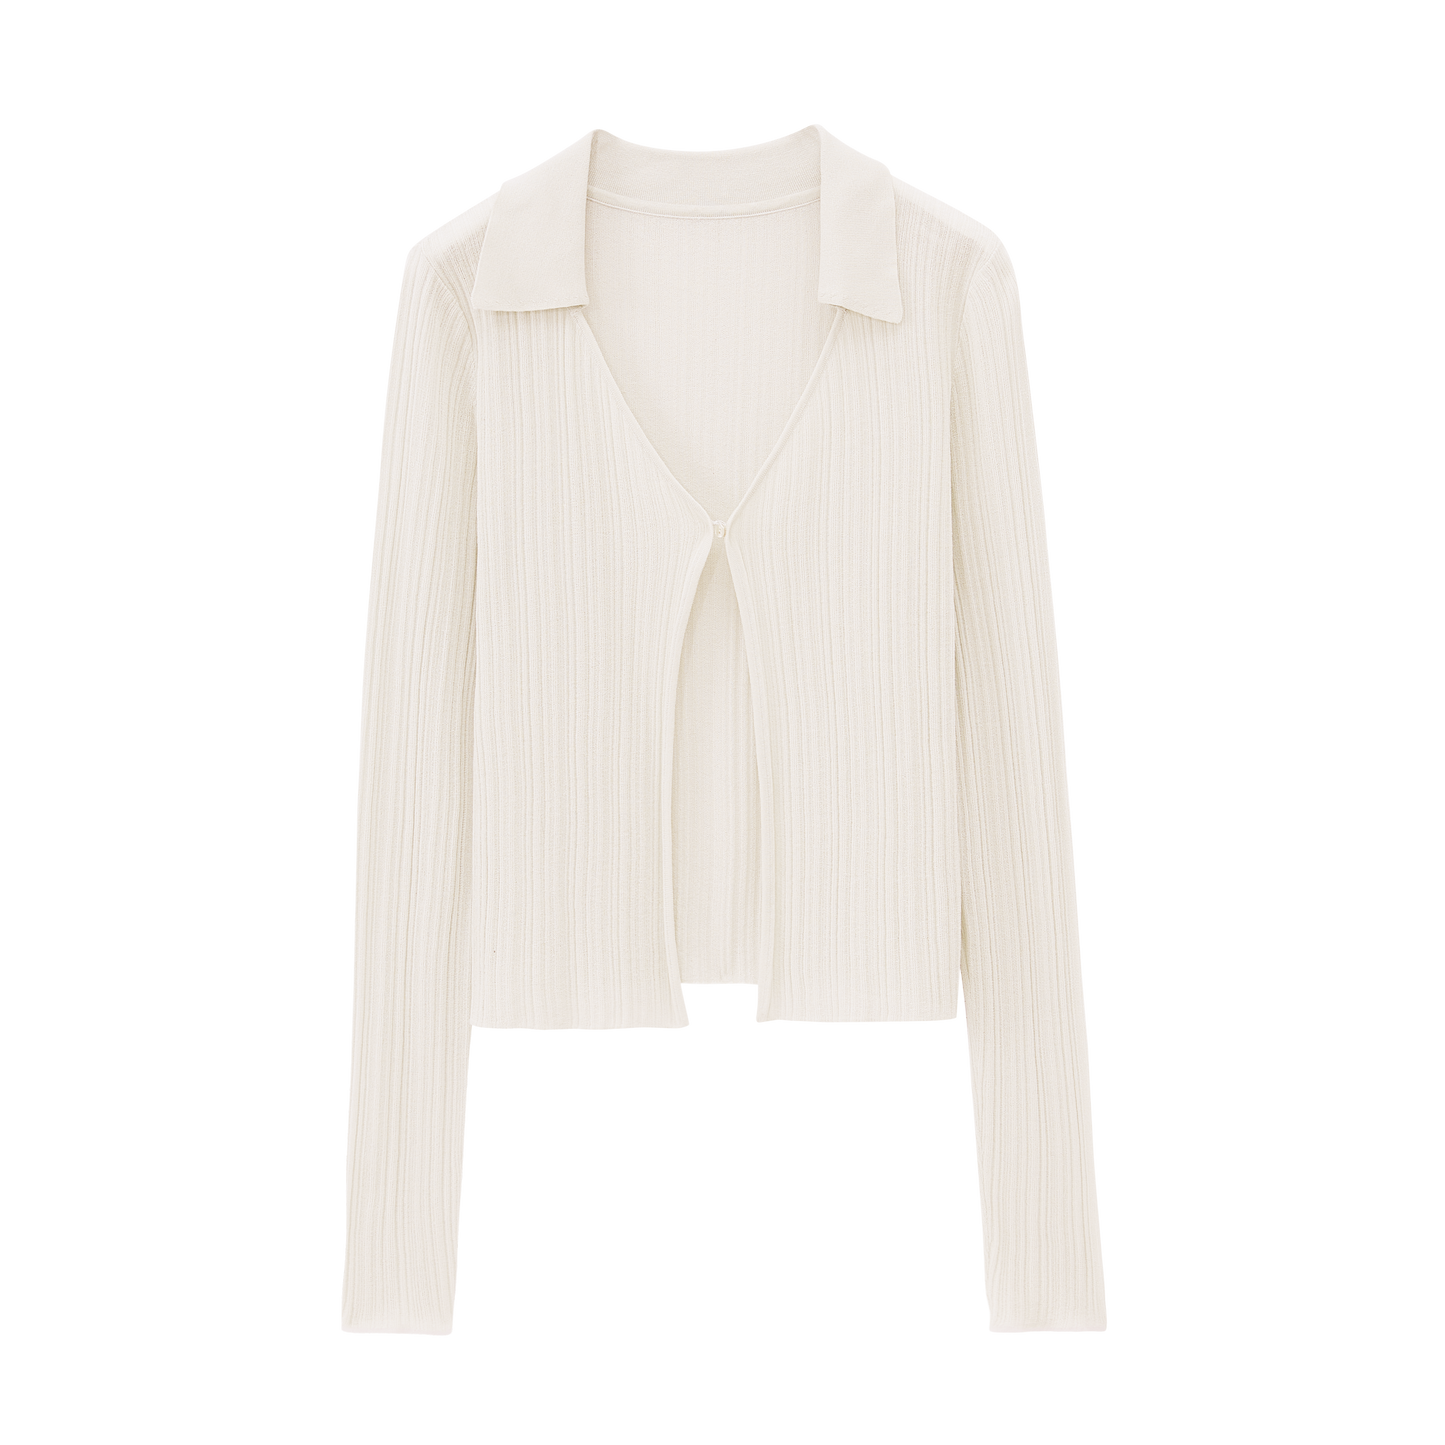 Flat lay image of off white knit cardigan with collar